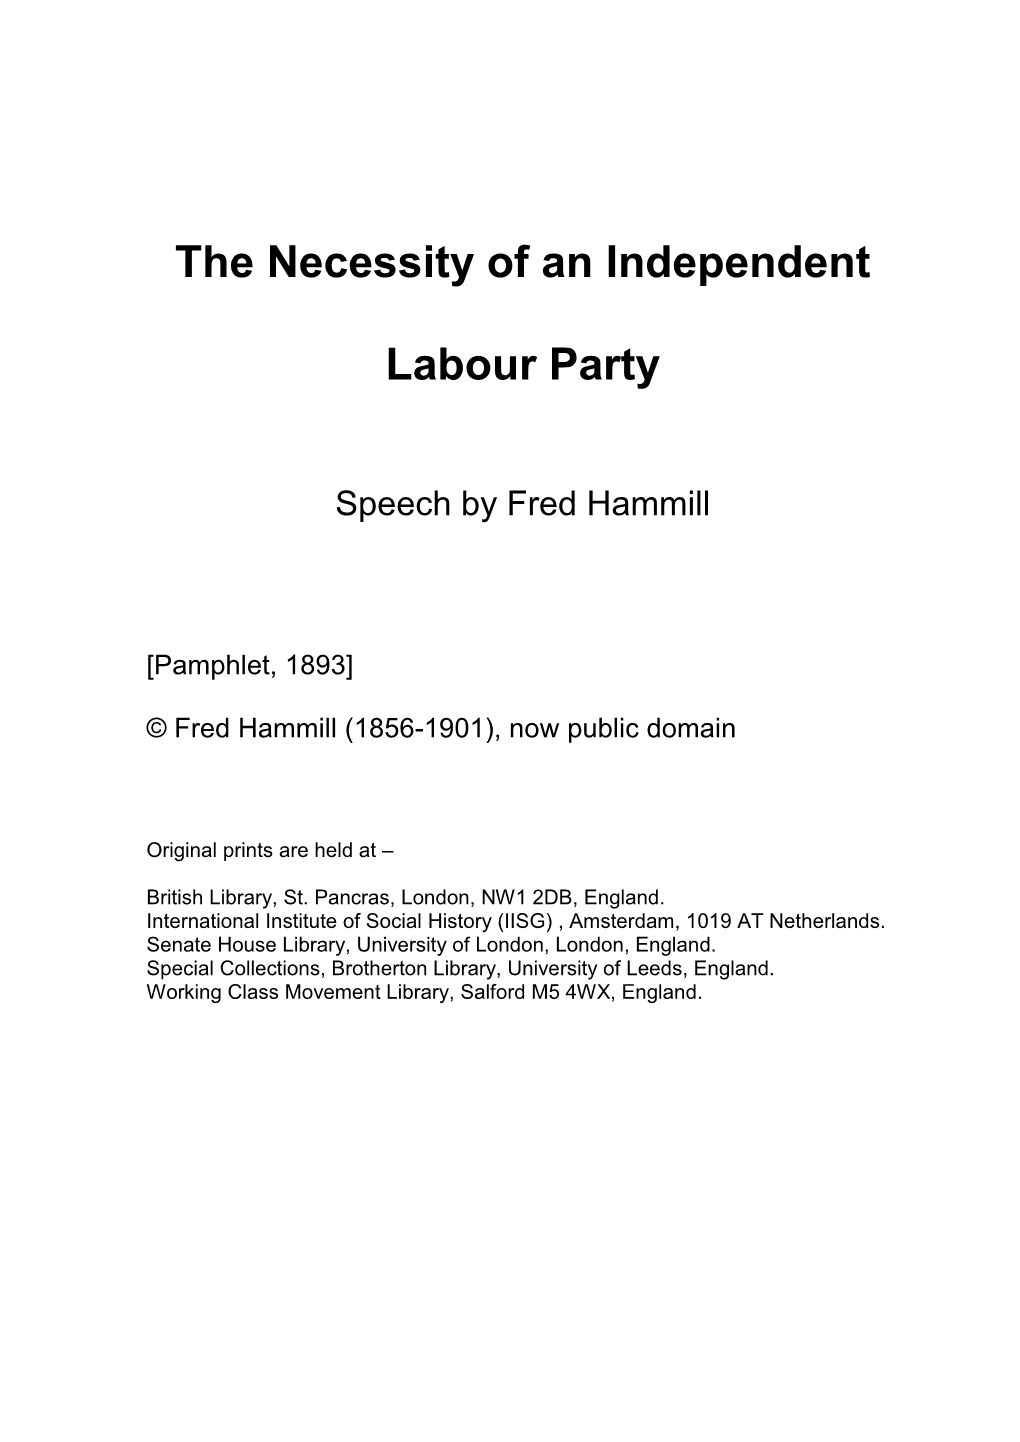 The Necessity of an Independent Labour Party, Fred Hammill